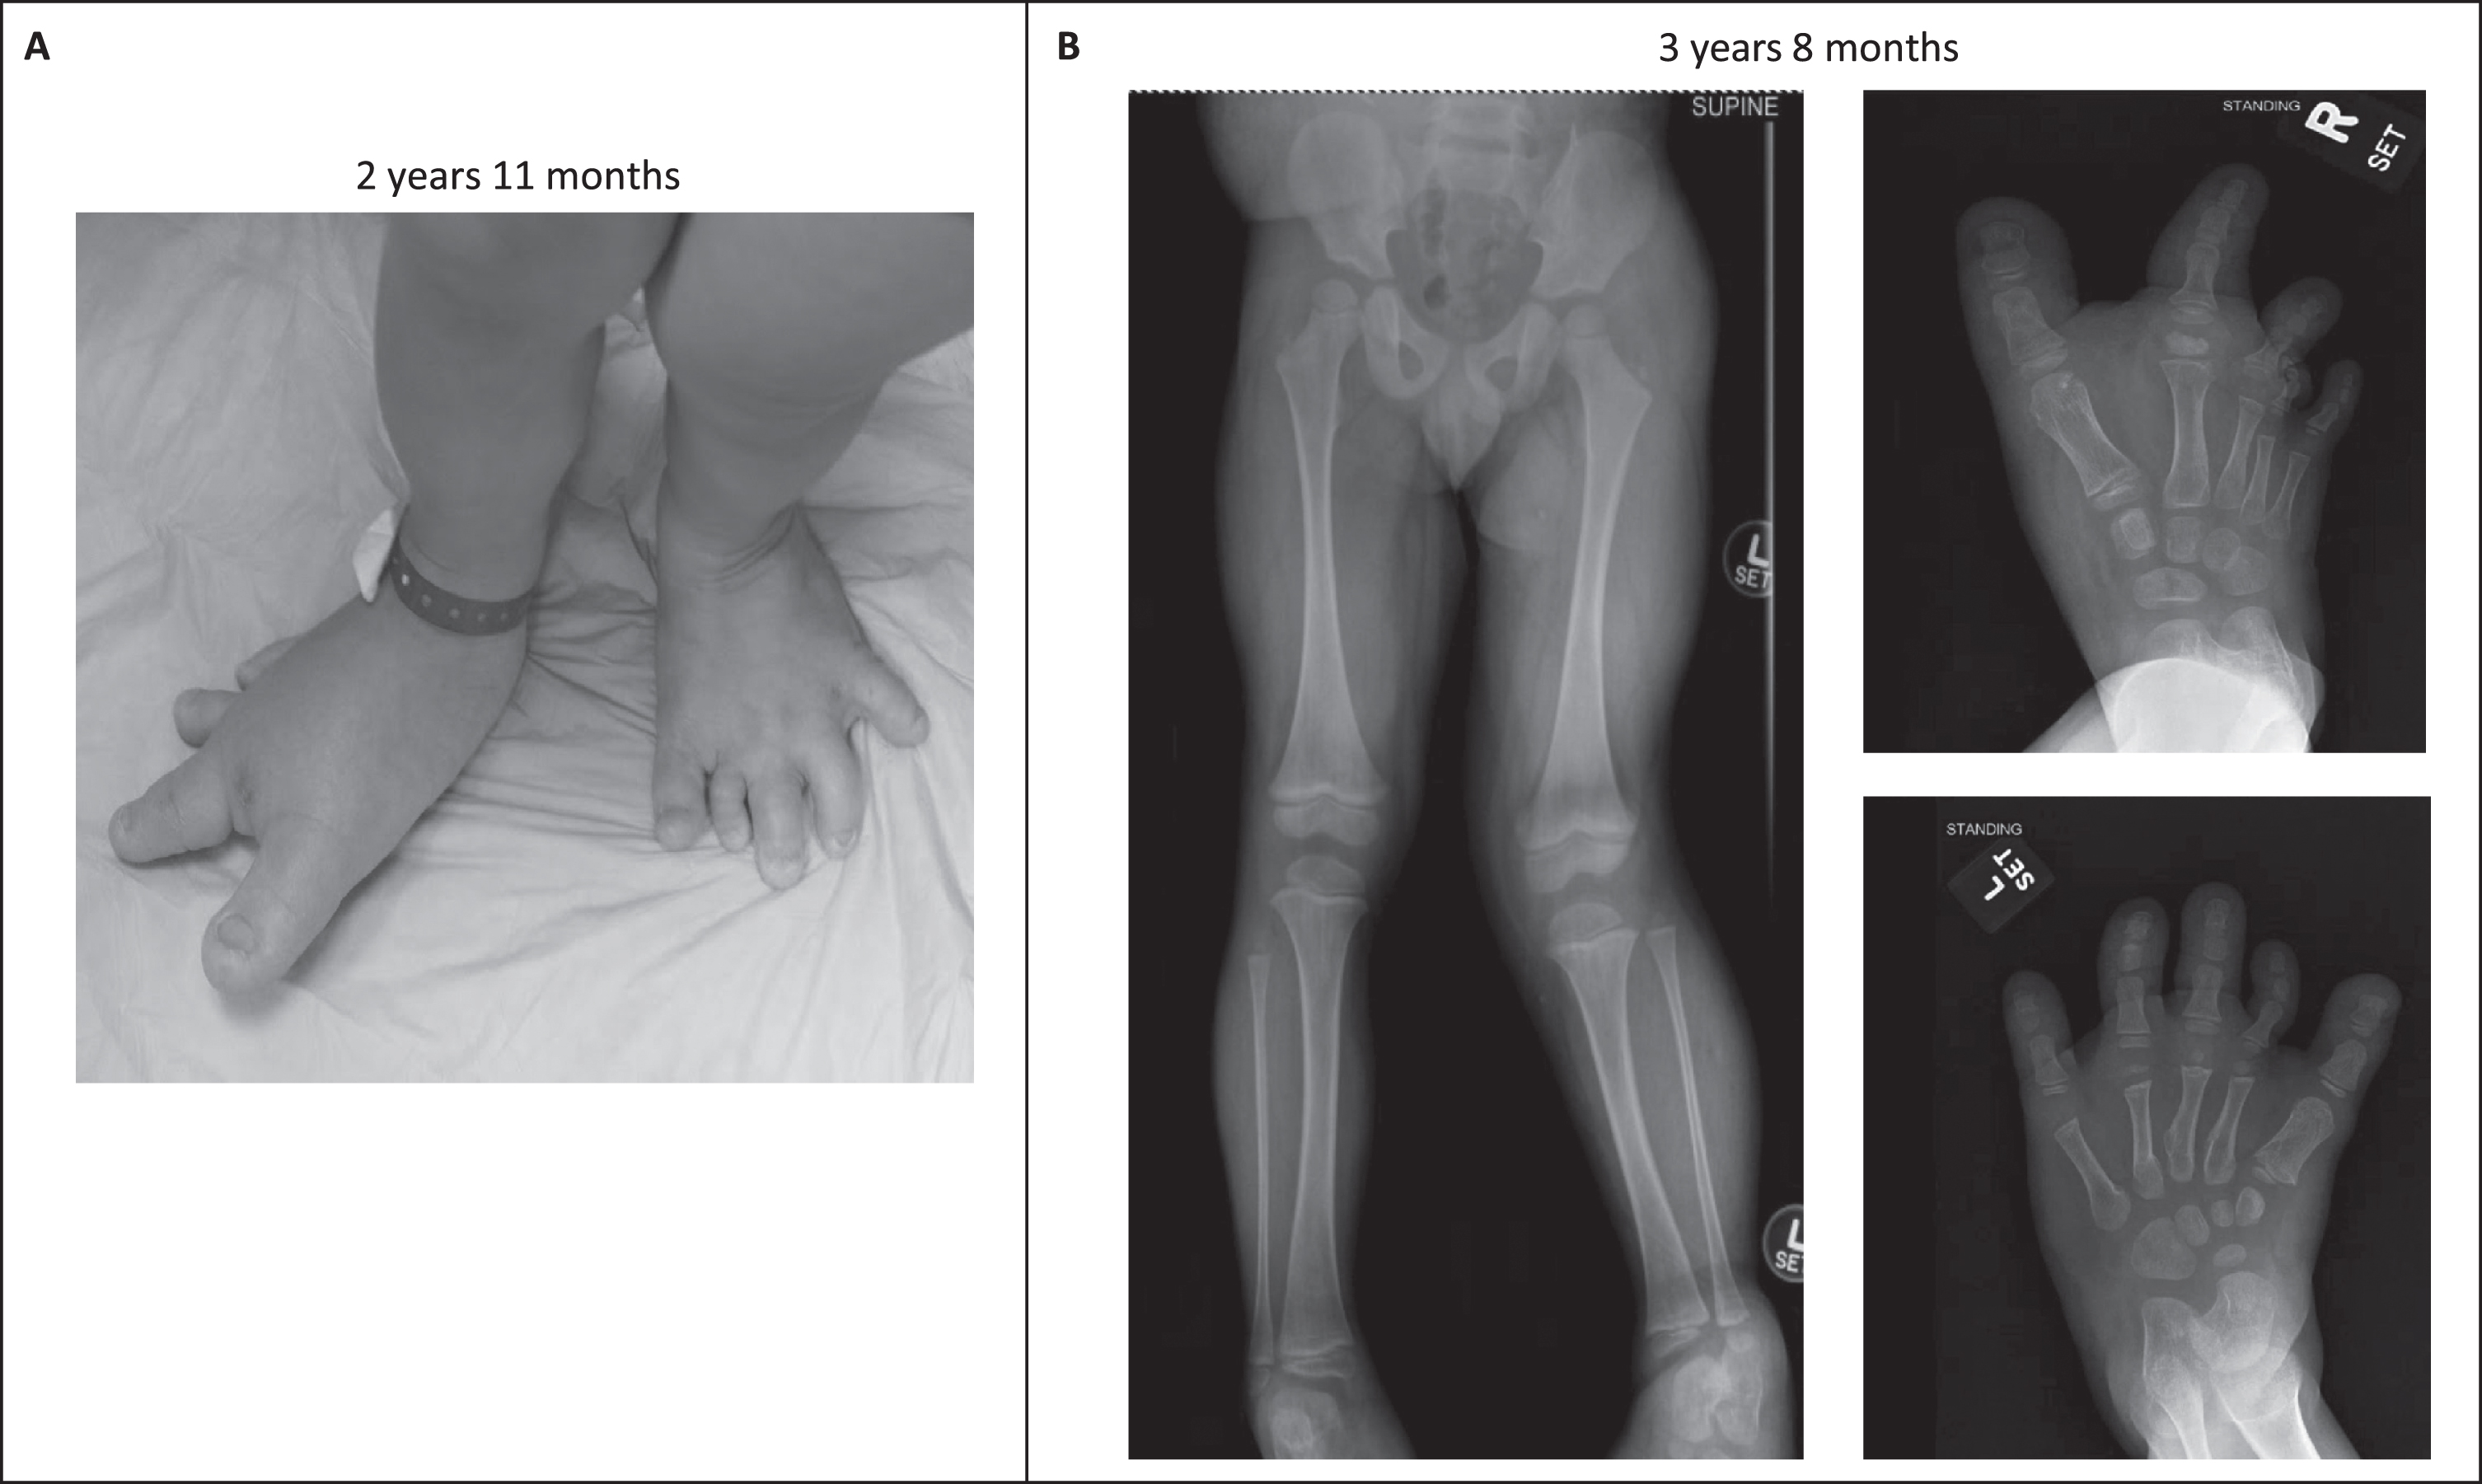 Initial clinical and radiographic orthopaedic evaluation. A-B). He presented with severe mosaic overgrowth of both feet, left genu valgum, and a mild leg length discrepancy.